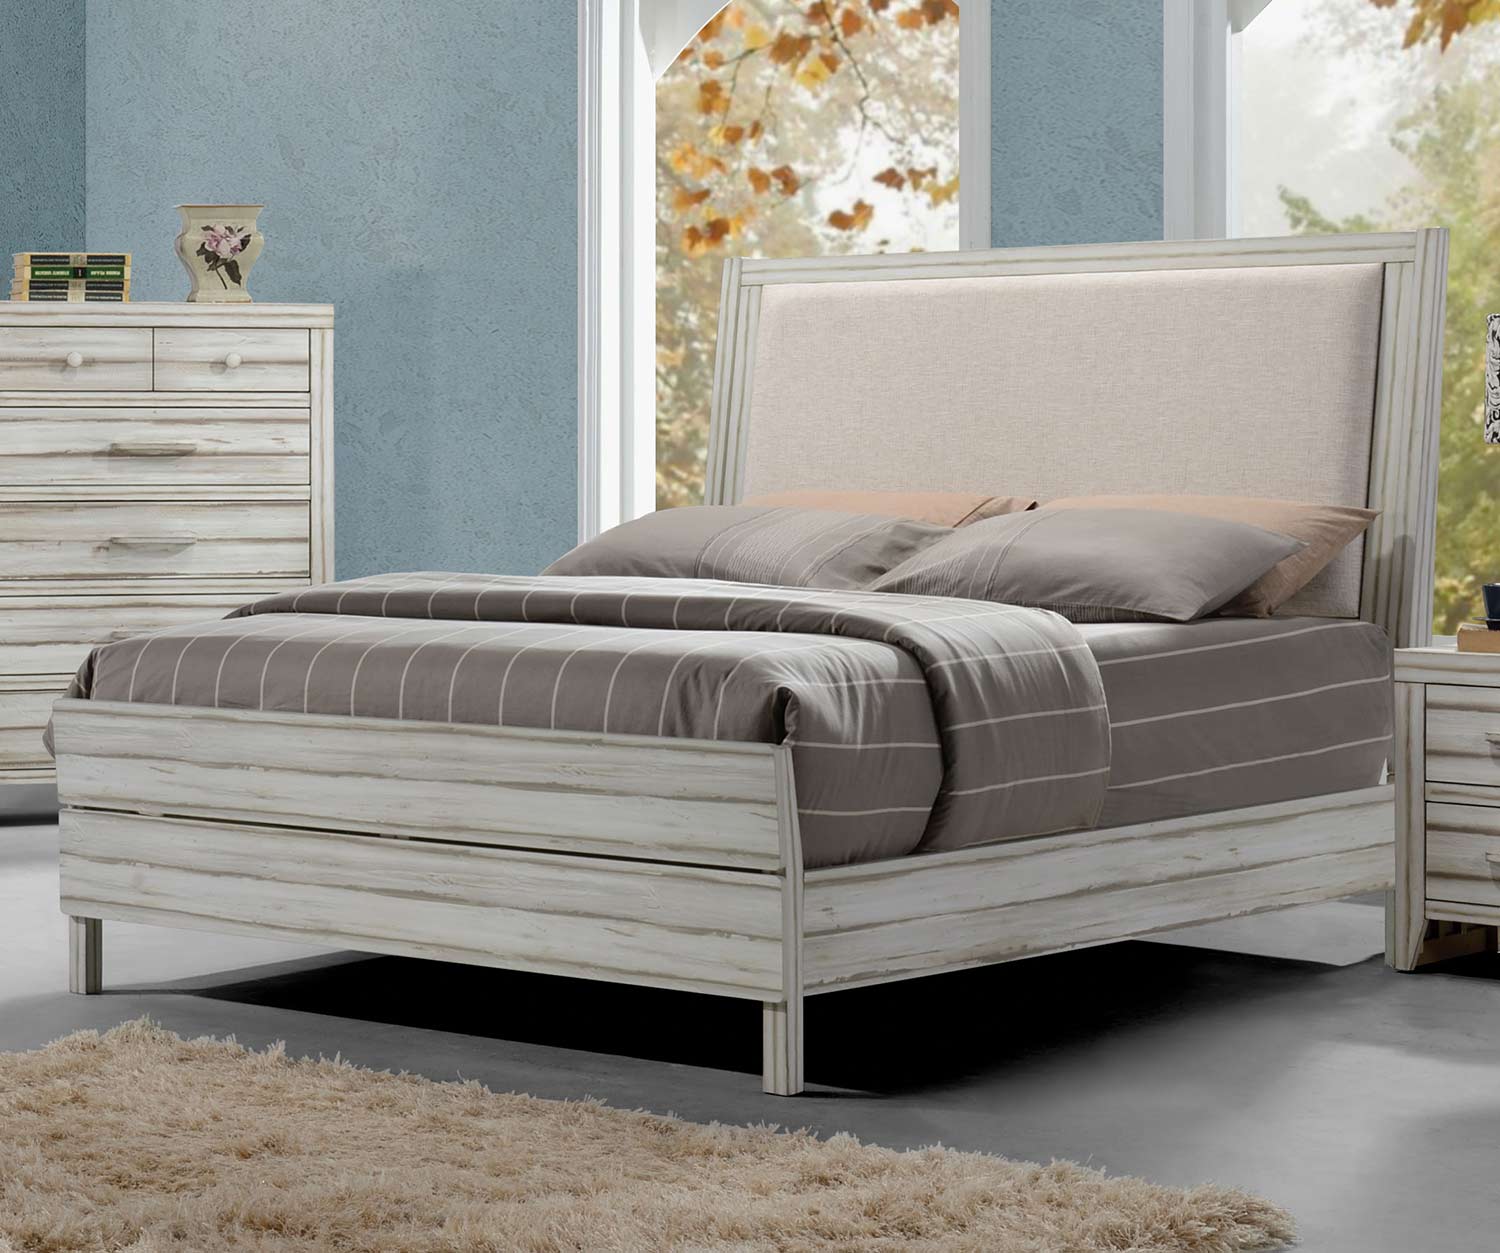 Acme Shayla Bed (Padded HB) - Fabric/Antique White